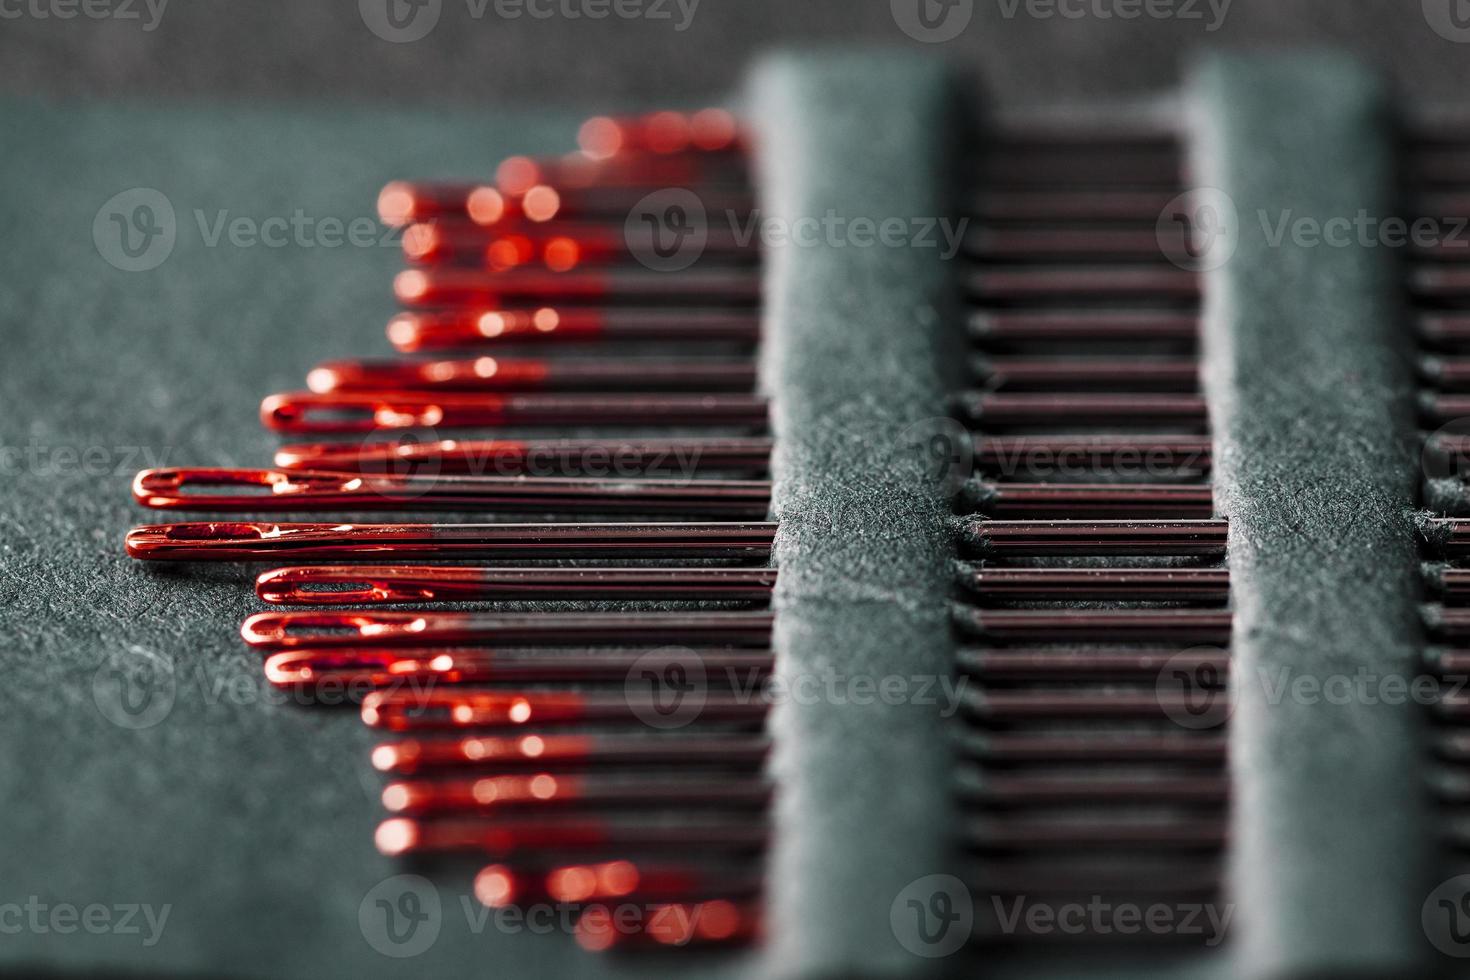 Sewing needles of different sizes in a set of red on a black background. photo